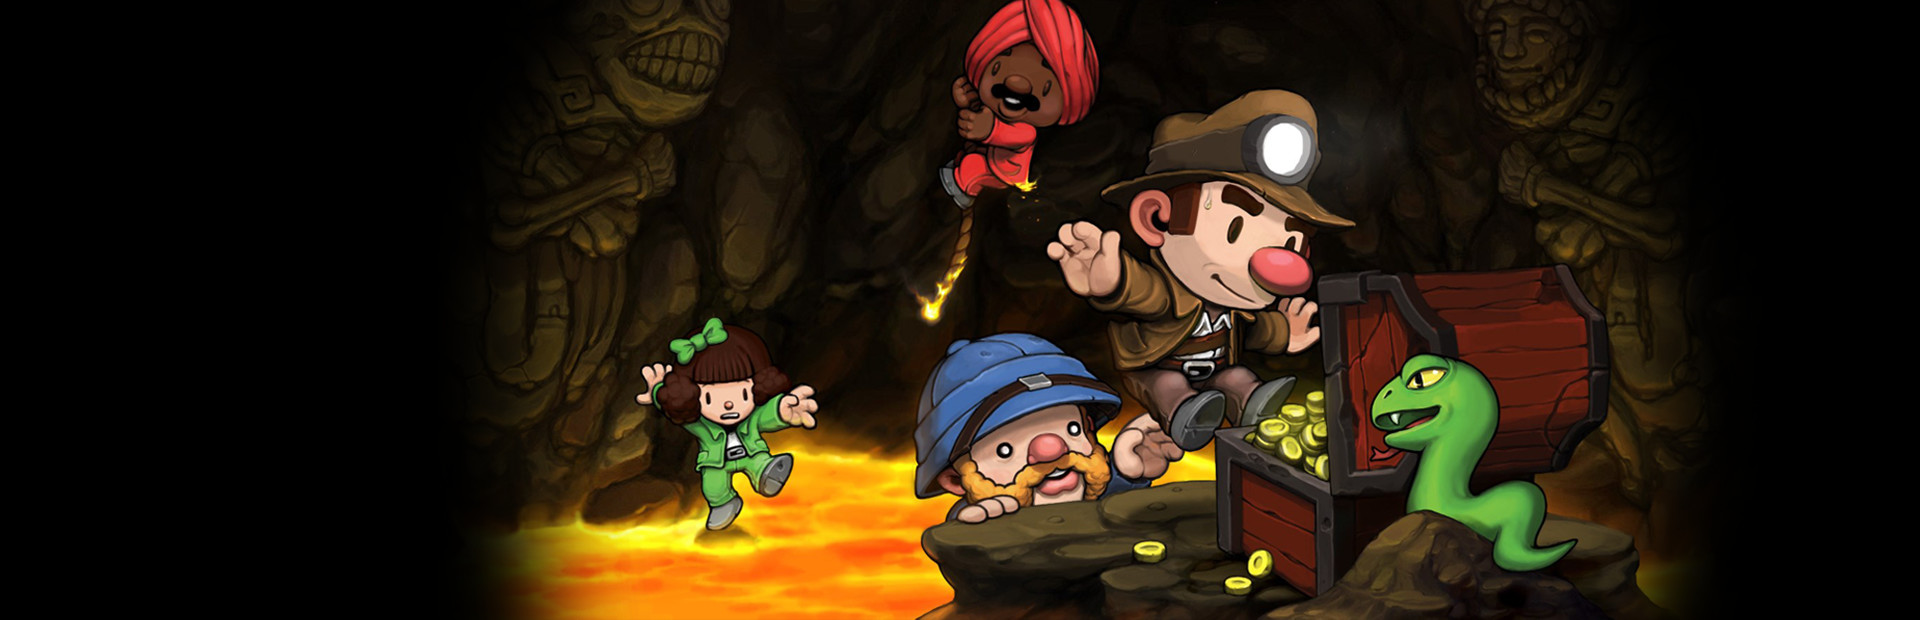 Spelunky cover image